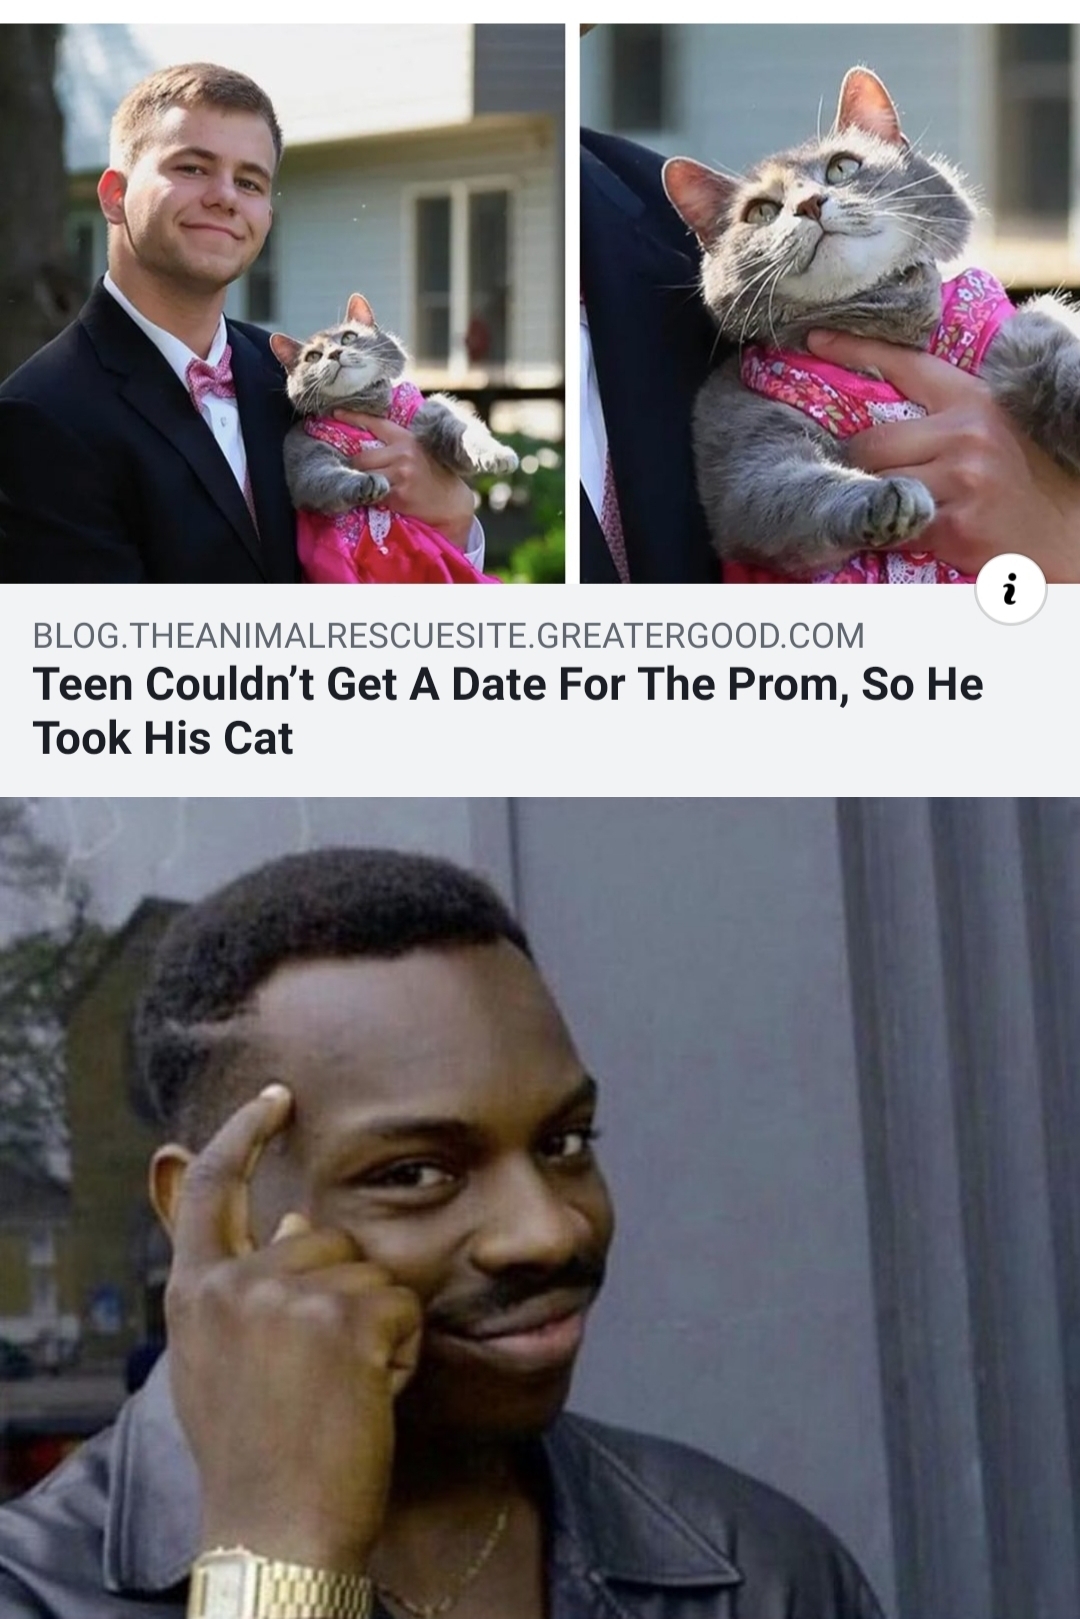 meme smart - Blog.Theanimalrescuesite.Greatergood.Com Teen Couldn't Get A Date For The Prom, So He Took His Cat